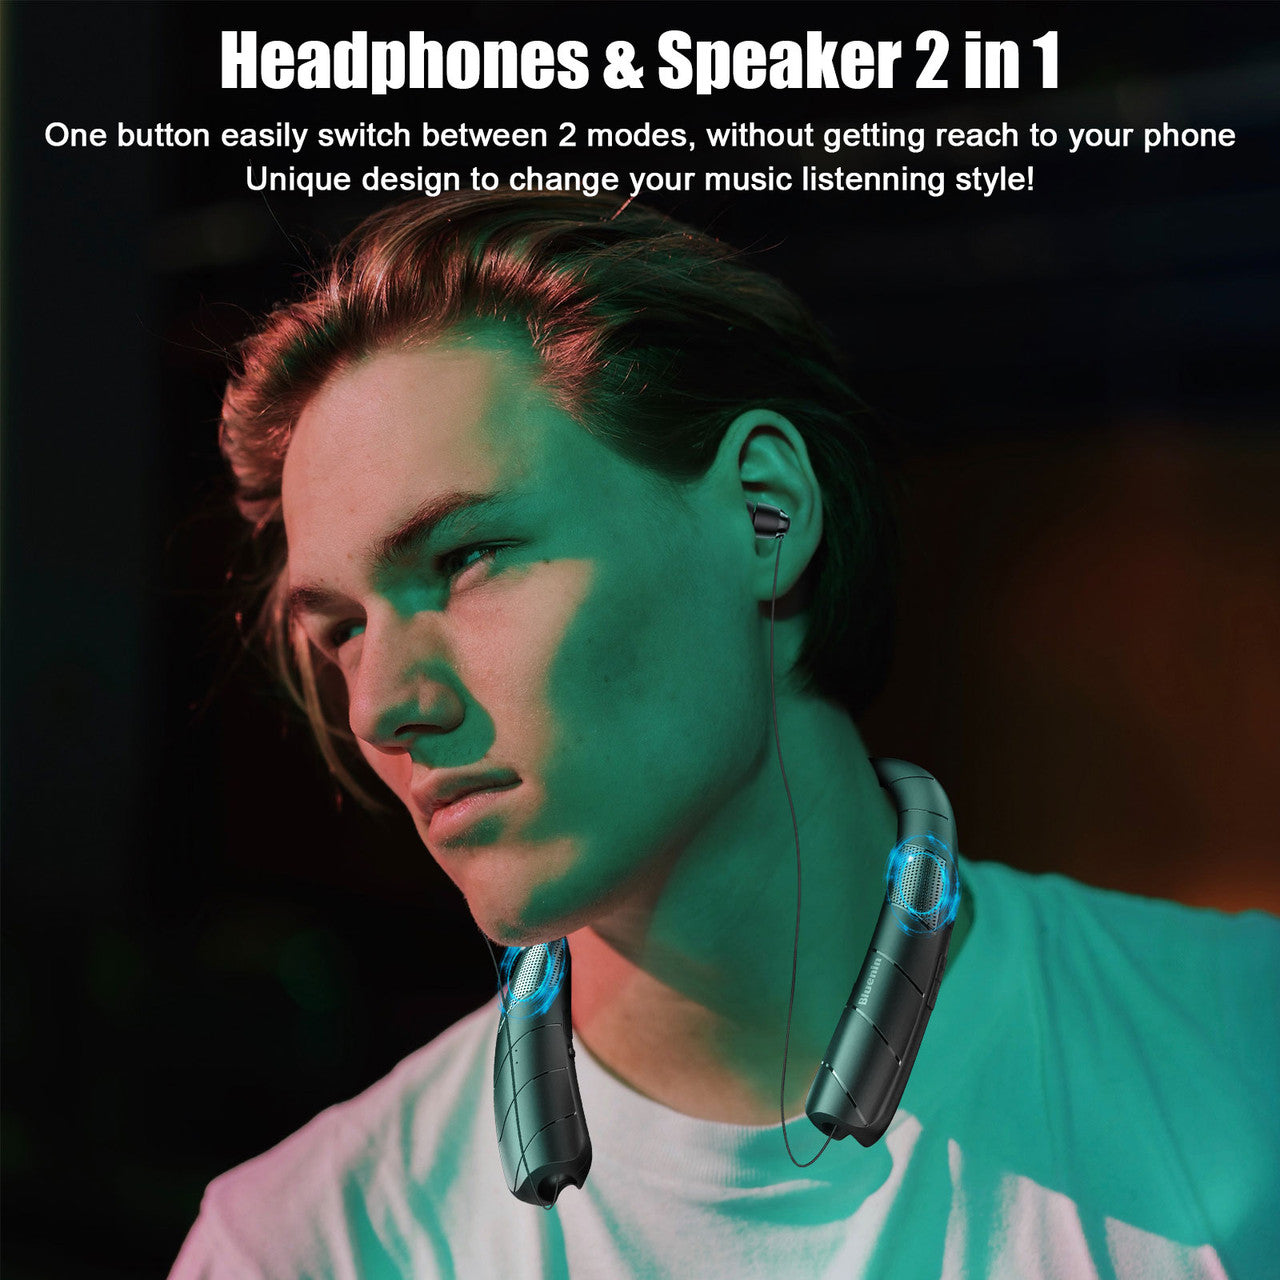 Bluetooth Headphones Speaker 2 in 1 with Stereo Surround Sound and Long Battery Life